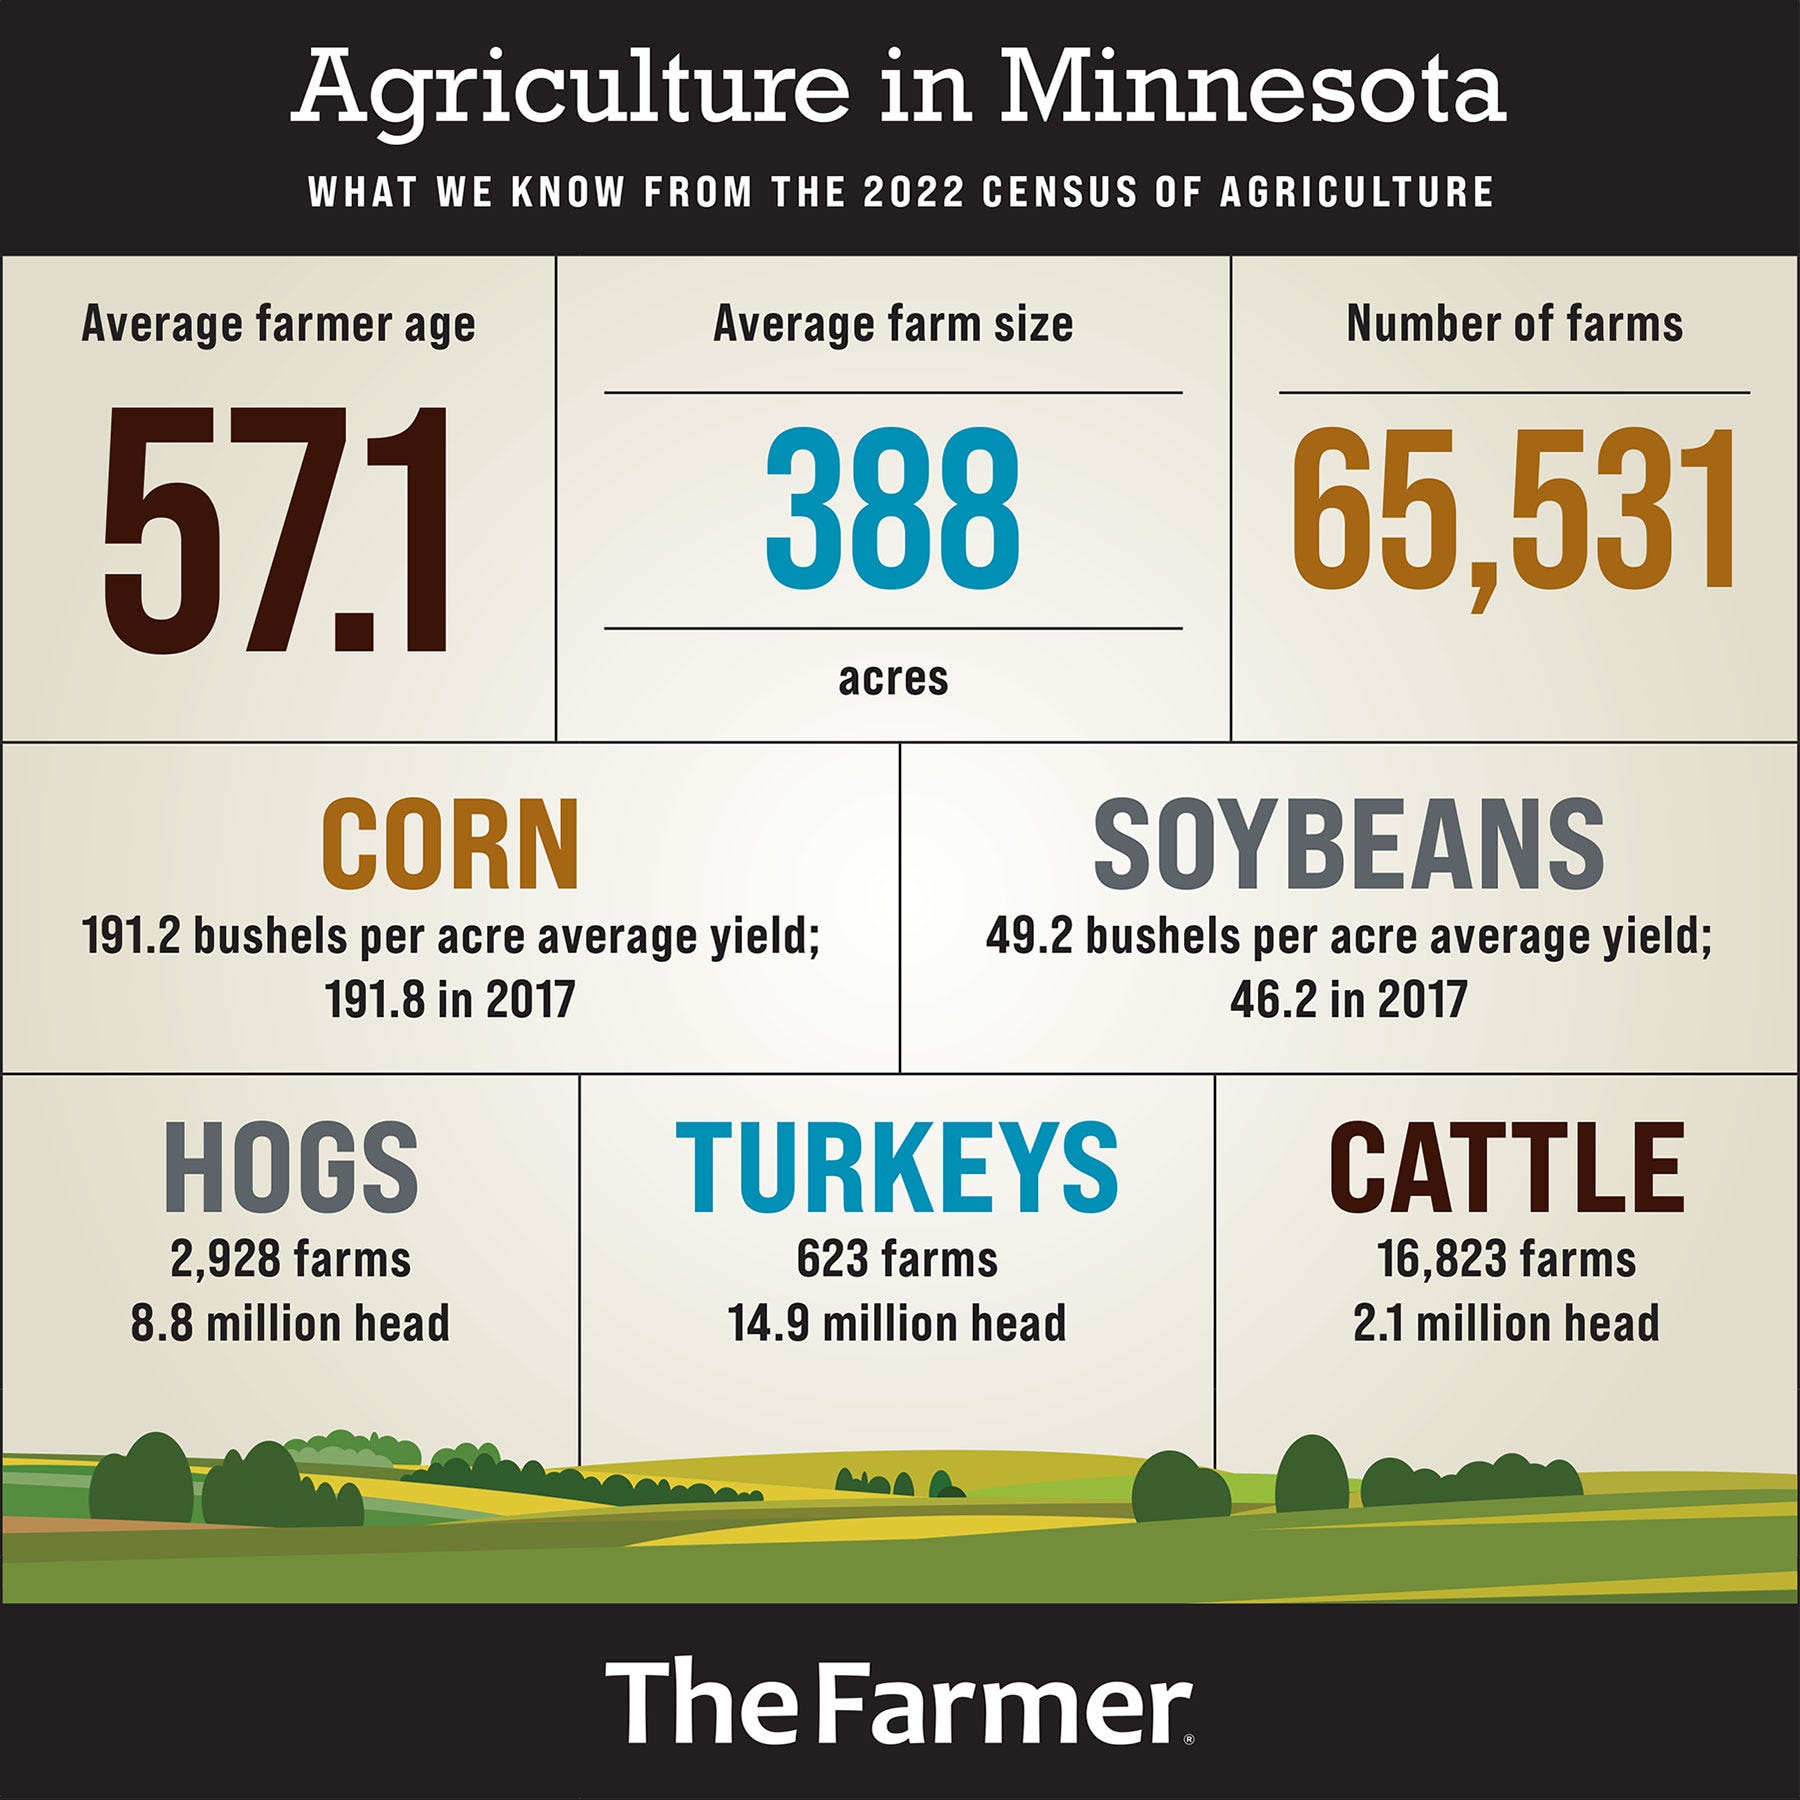 An infographic detailing agriculture in Minnesota